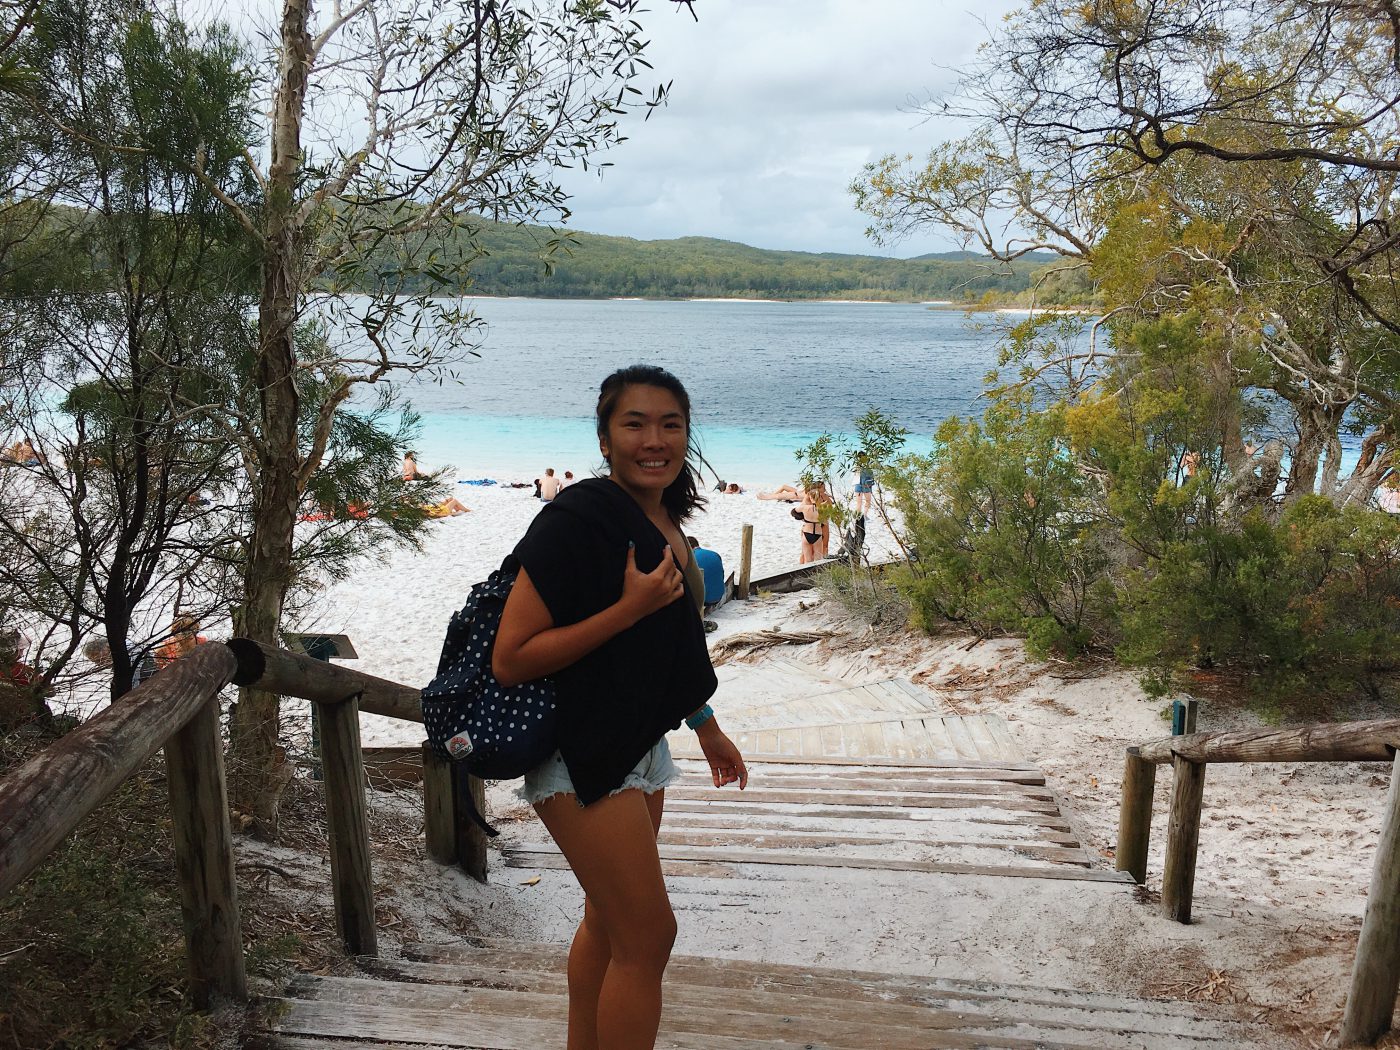 I was quite excited at the first view of Lake McKenzie